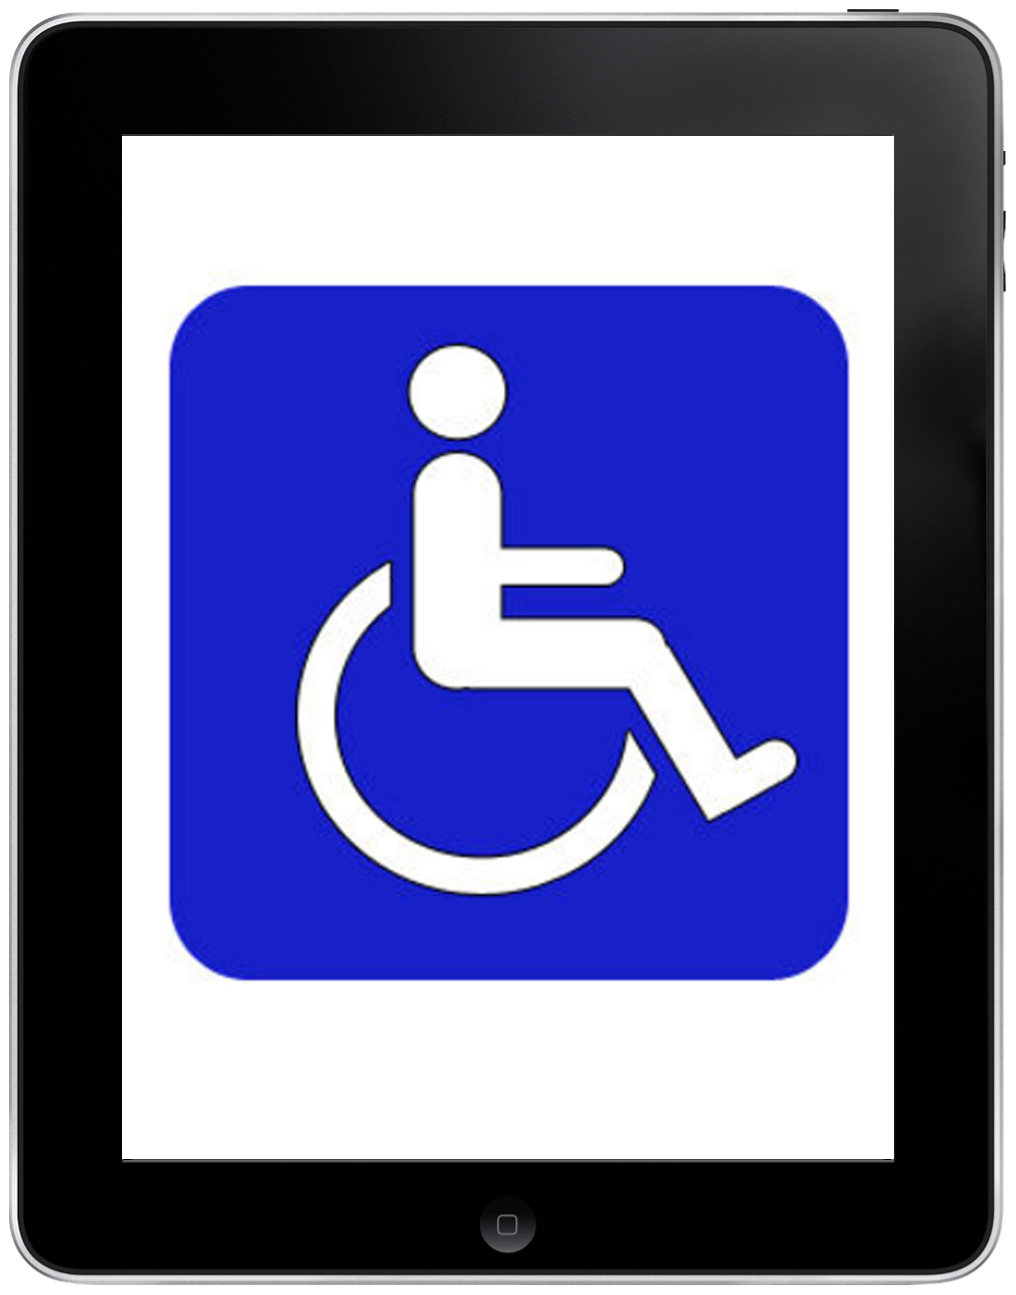 The iPad as a Disruptive Force in Assistive Technology